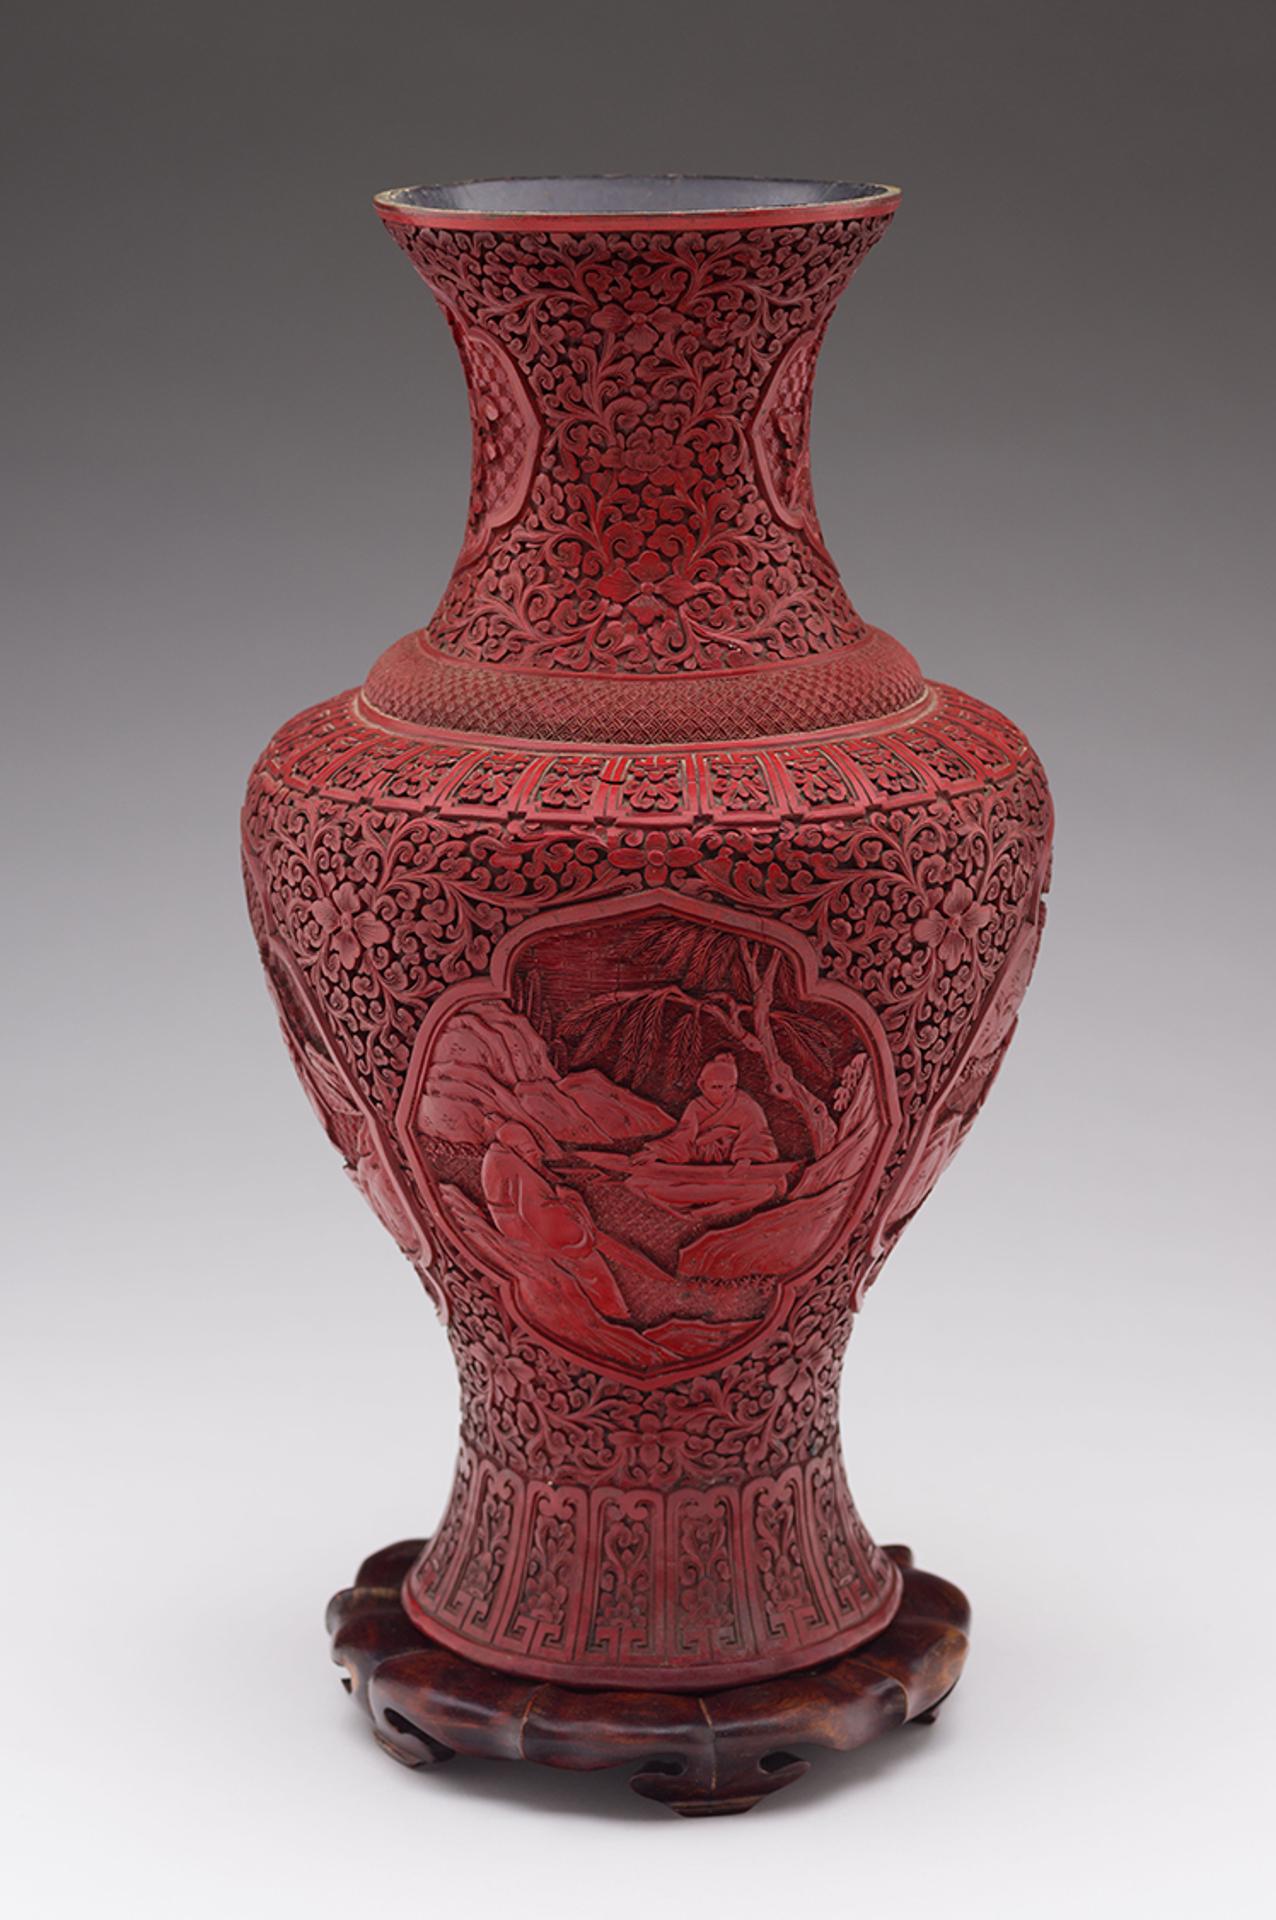 Chinese Art - Large Chinese Cinnabar Lacquer Baluster Vase, 19th Century